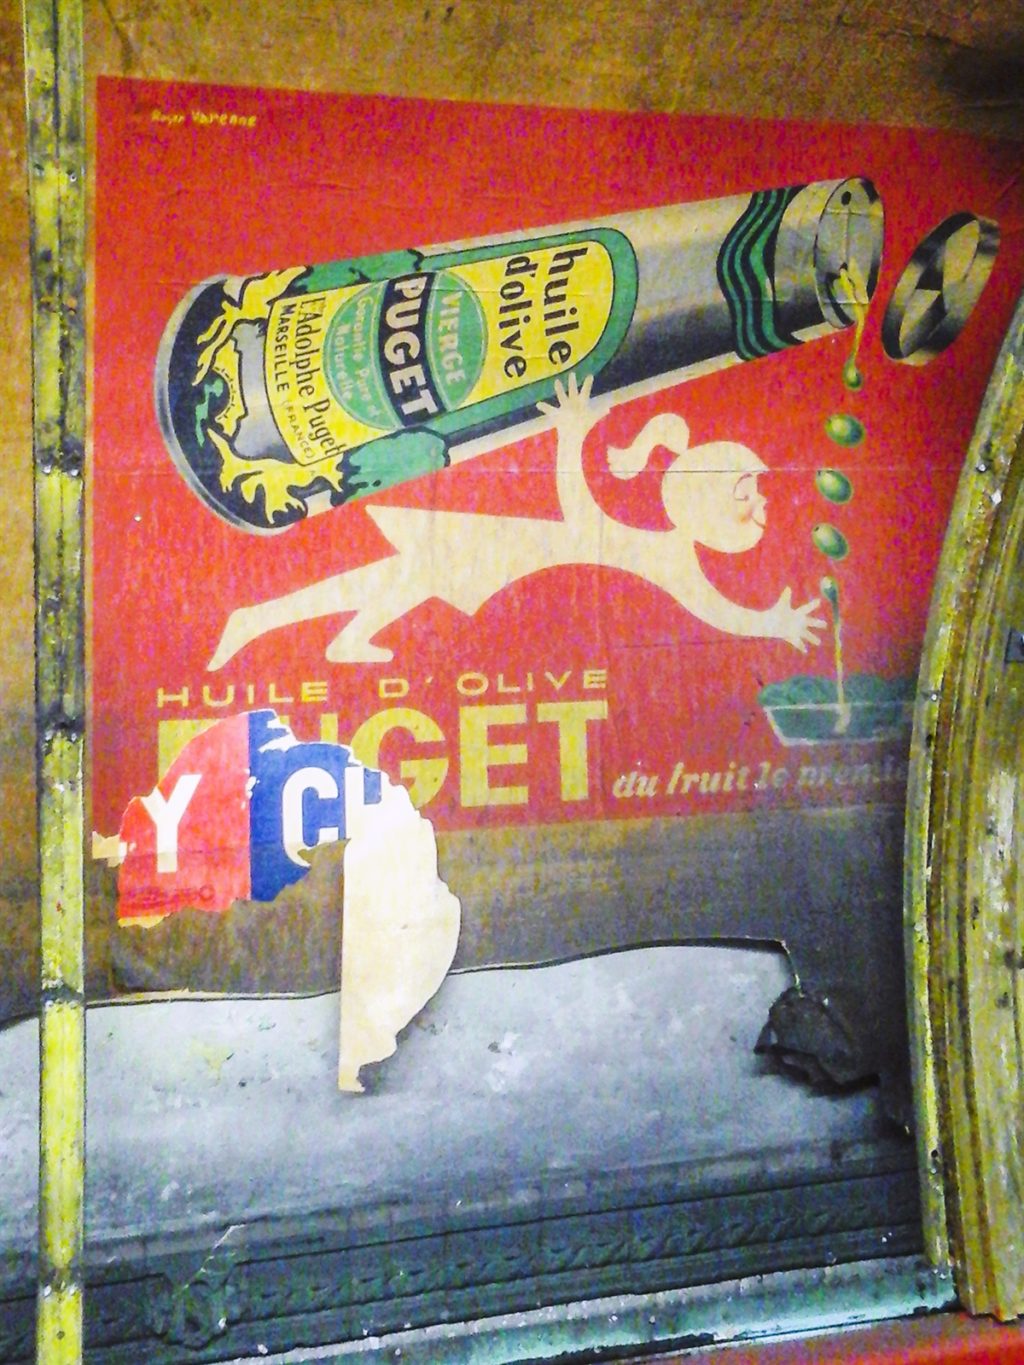 Advertising time capsules at Marcadet-Poissonniers station in the form of vintage 1950s posters.